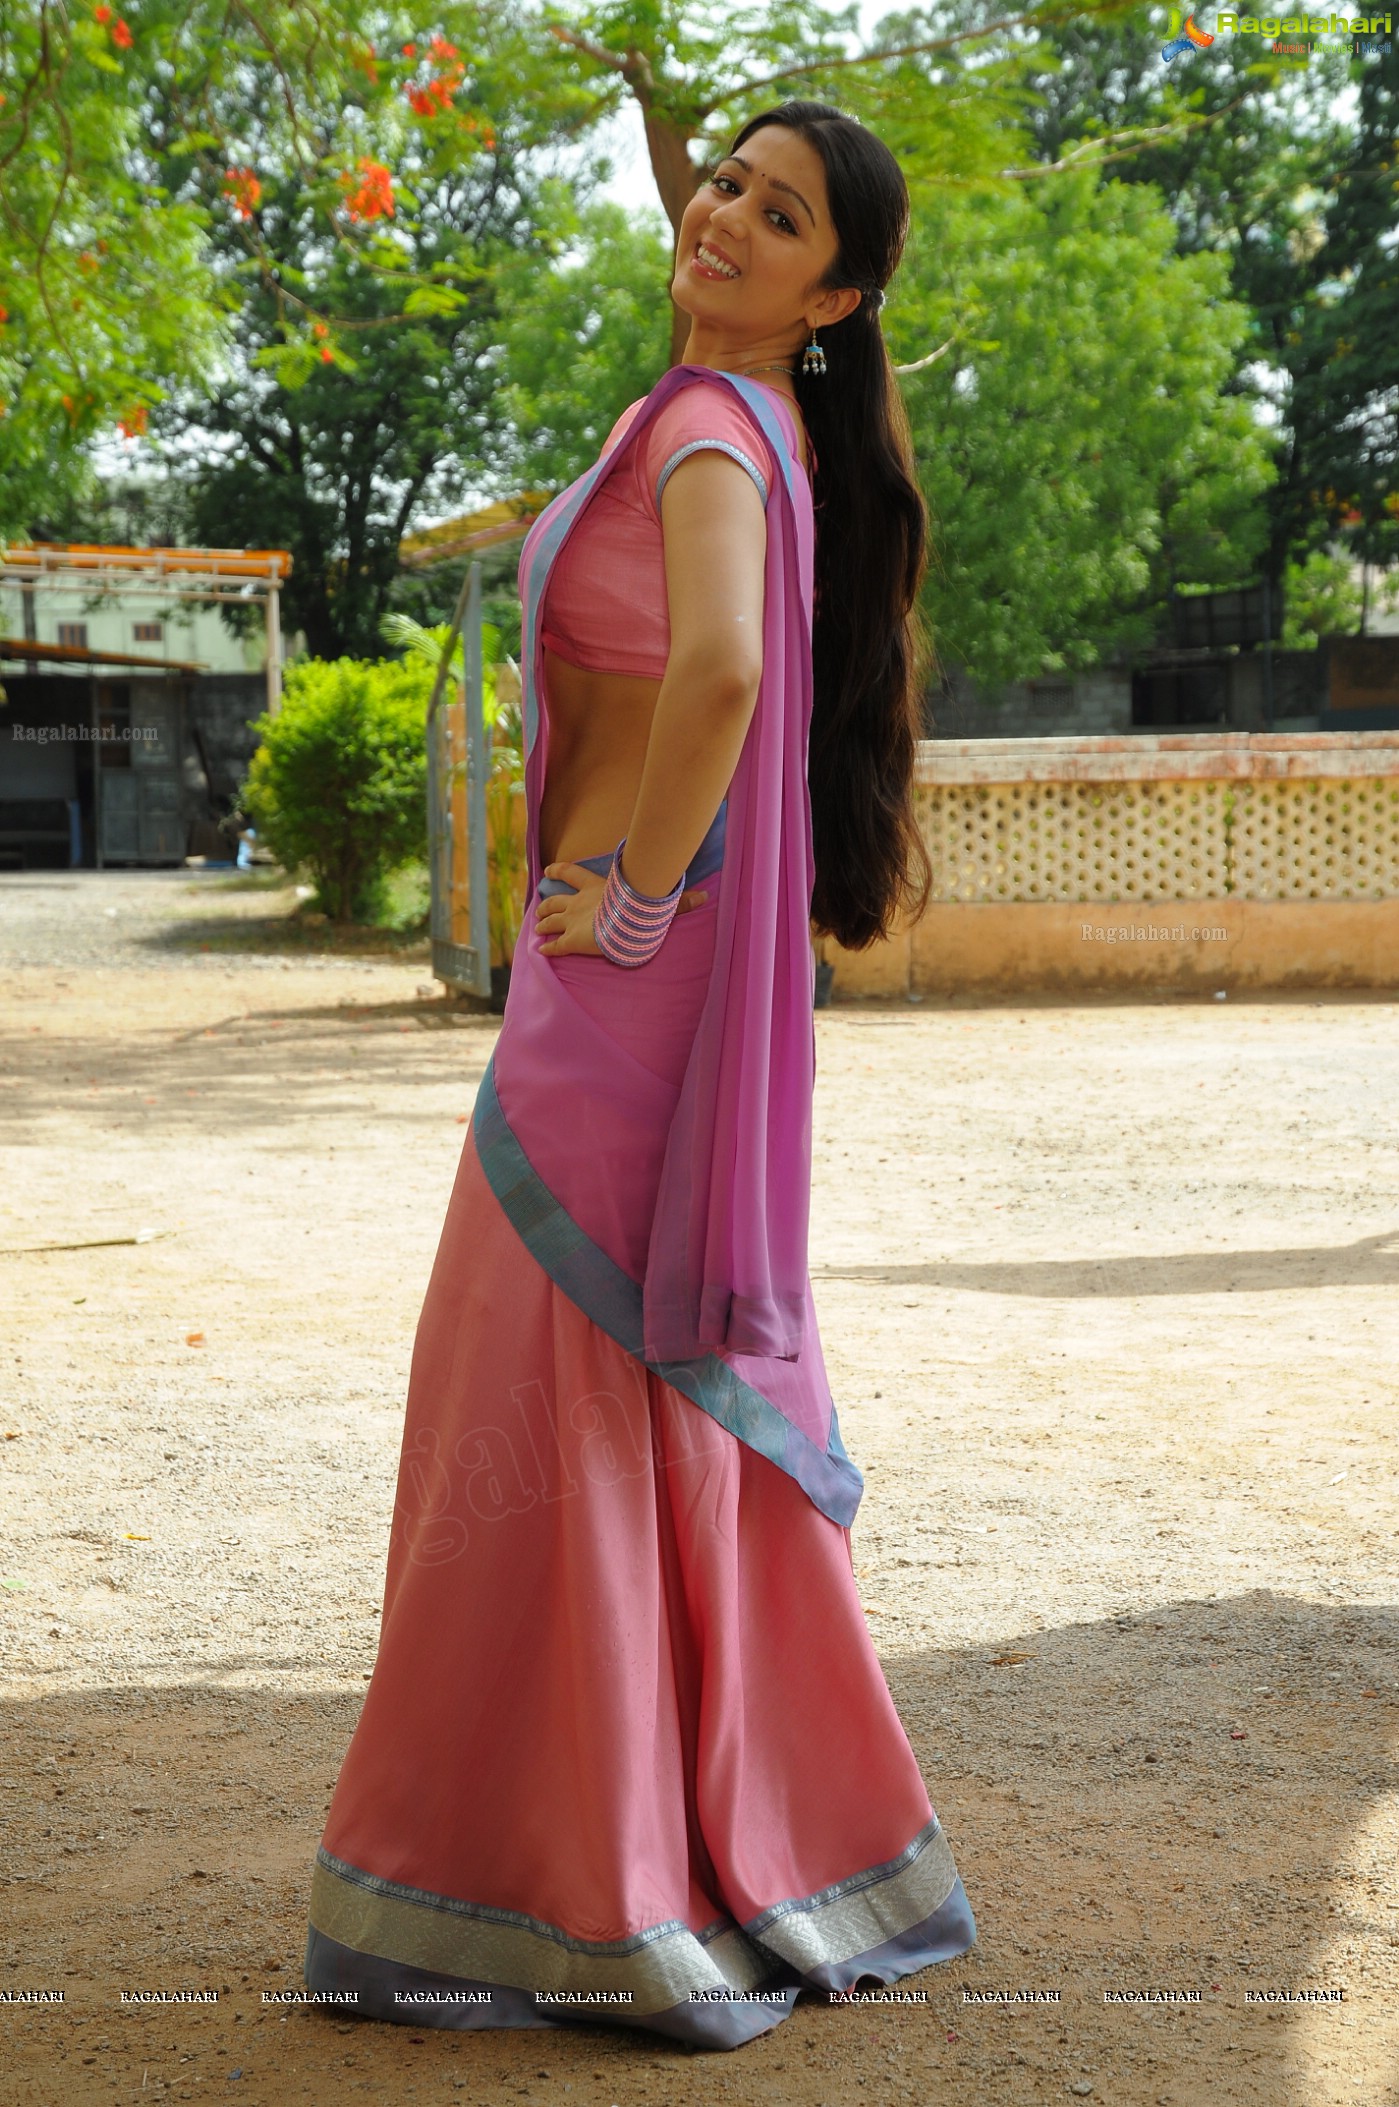 Charmi in Pink Saree, Photo Gallery, Images